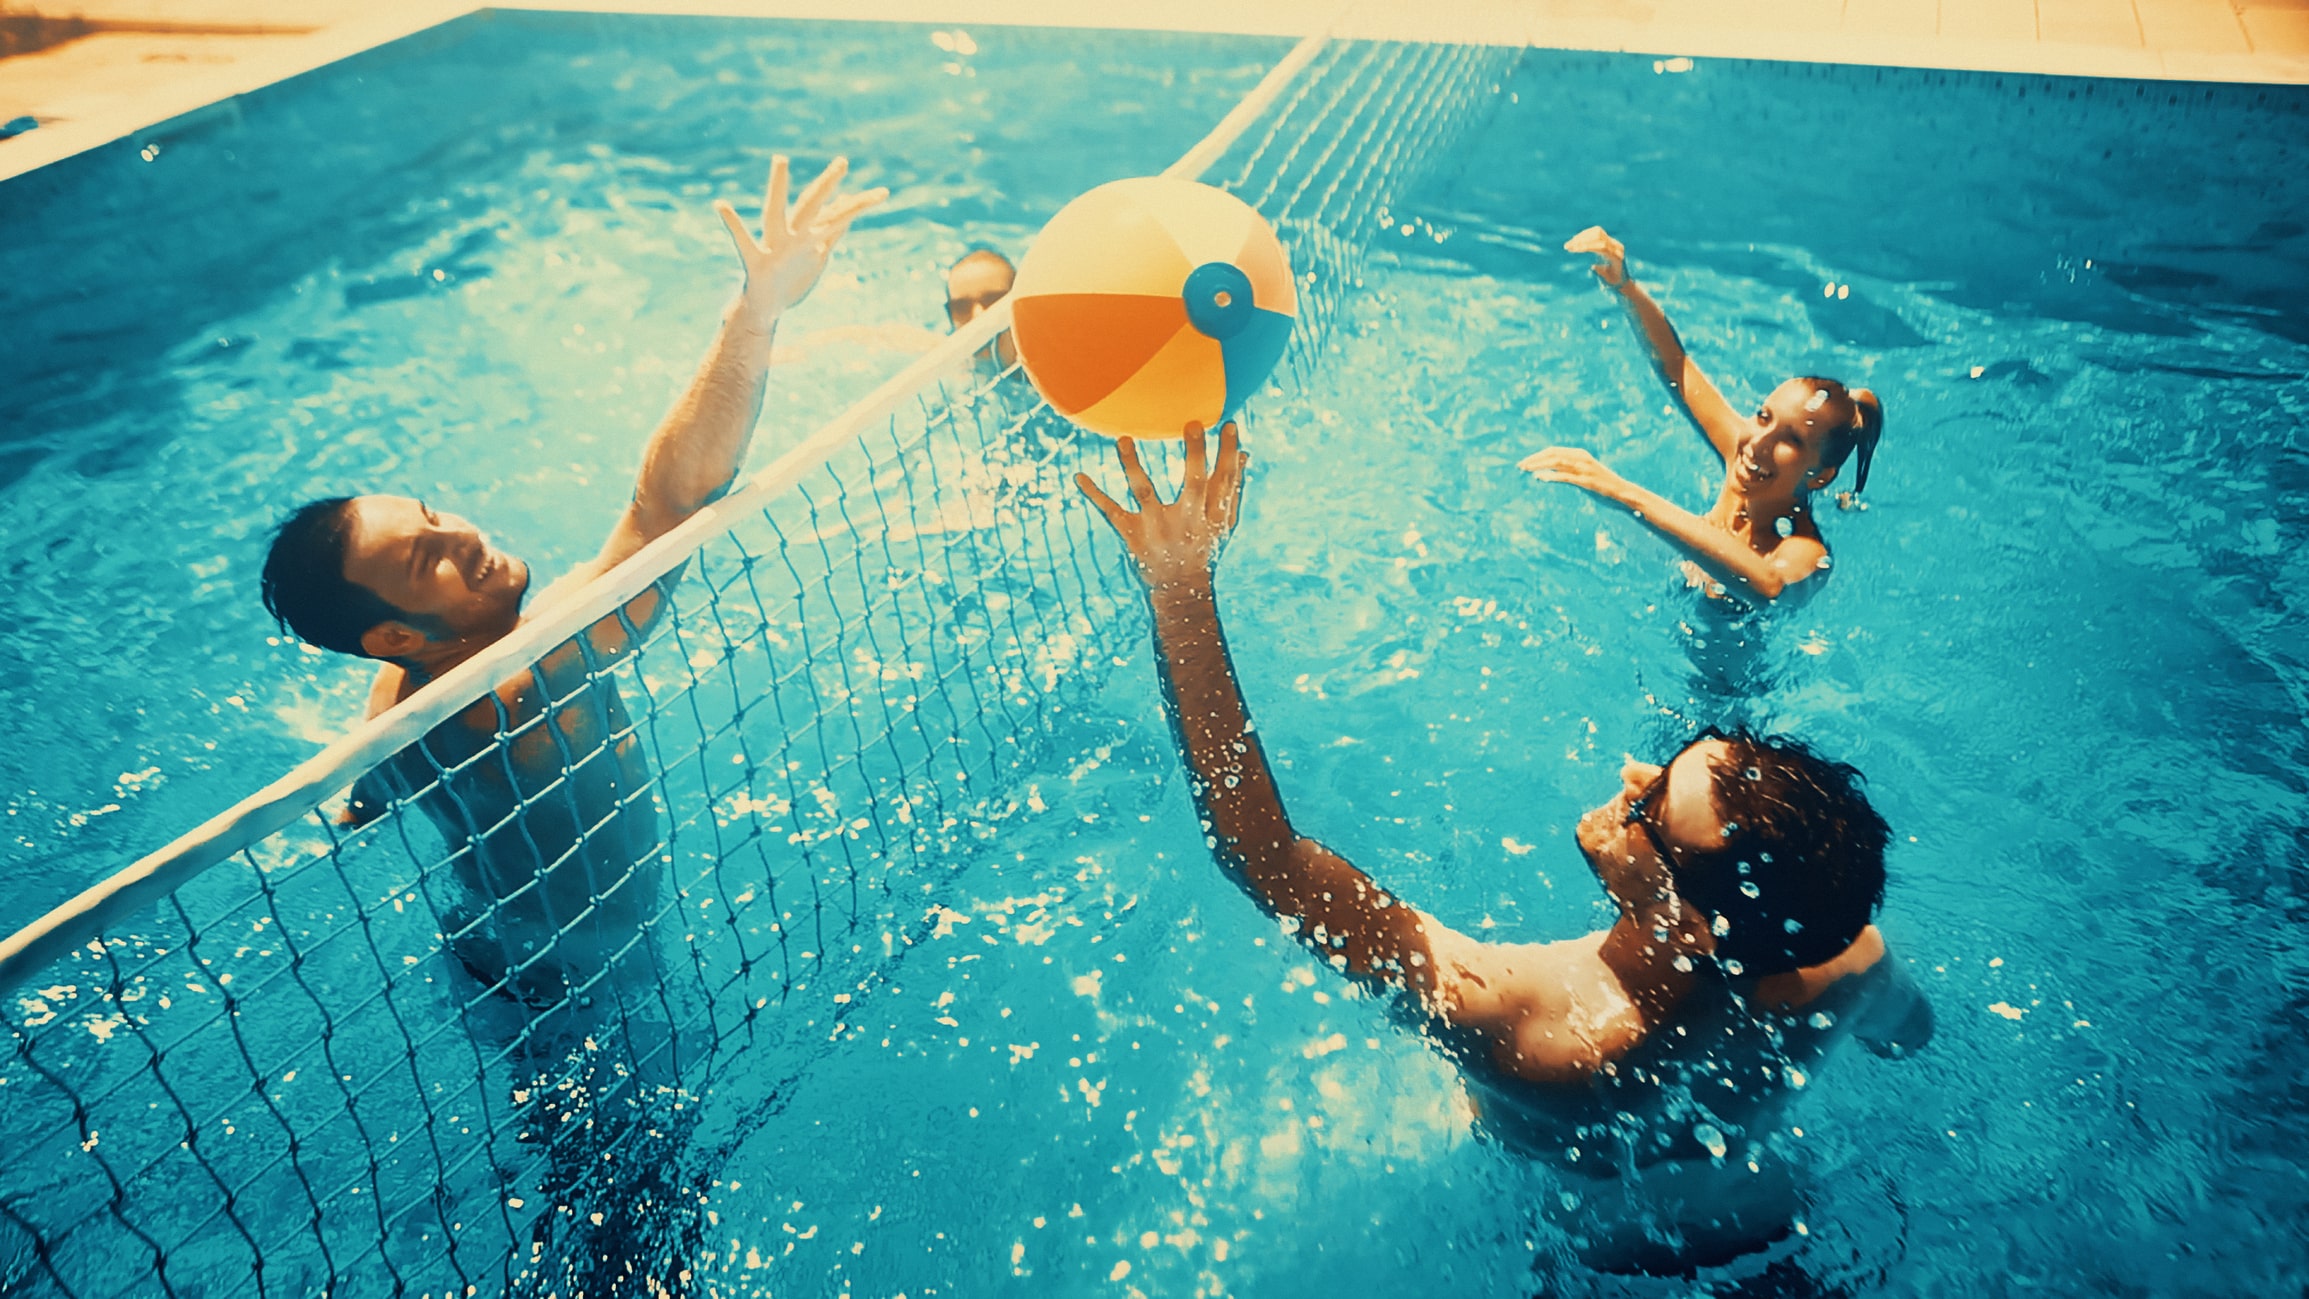 playing-volleyball-in-swimming-pool.jpg?width=2309&name=playing-volleyball-in-swimming-pool.jpg